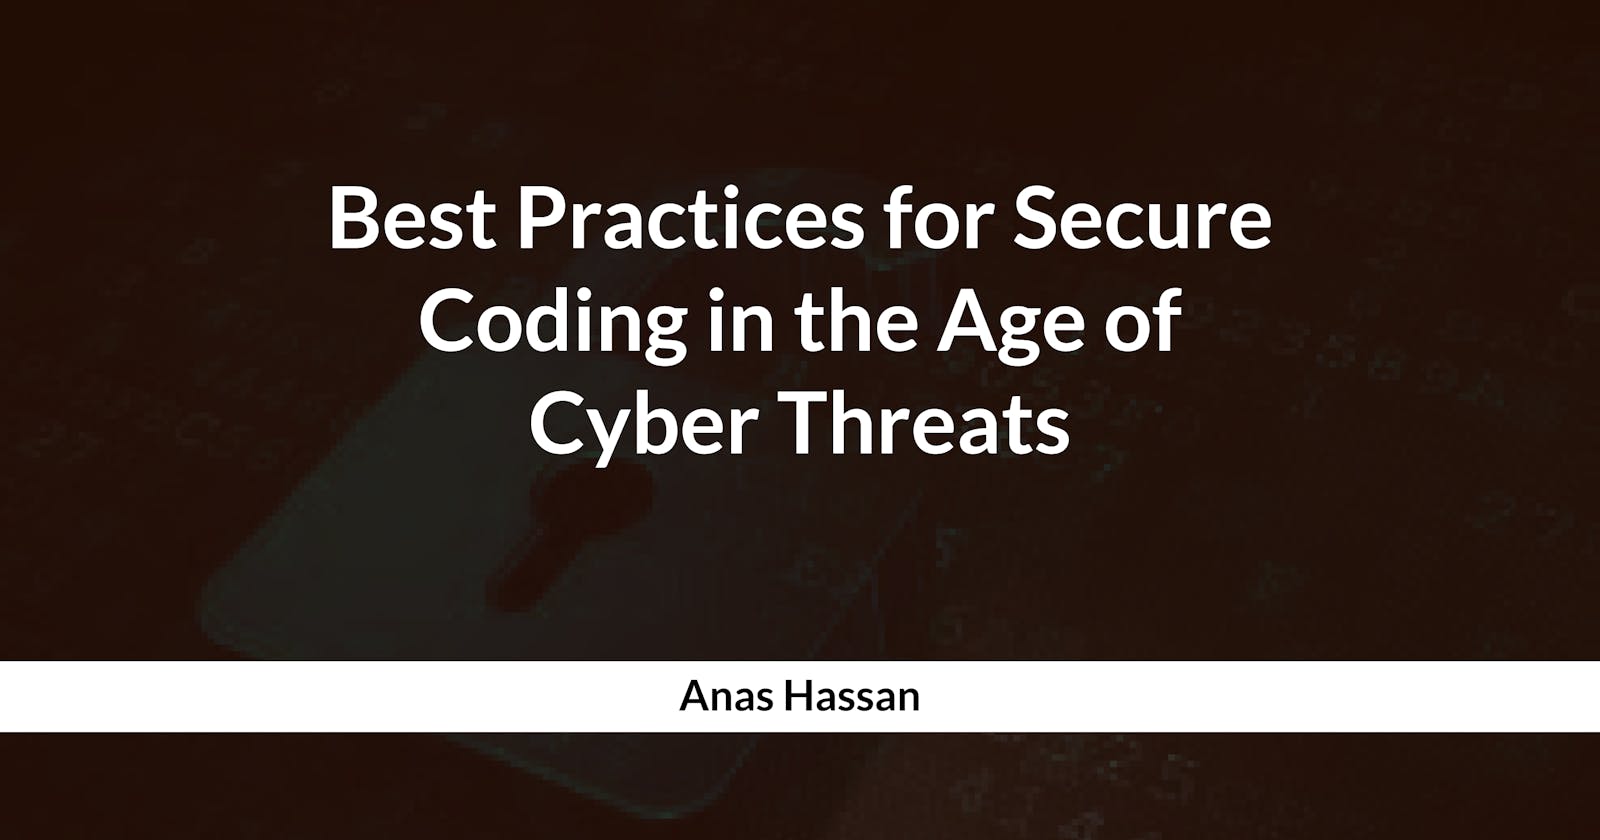 Best Practices for Secure Coding in the Age of Cyber Threats